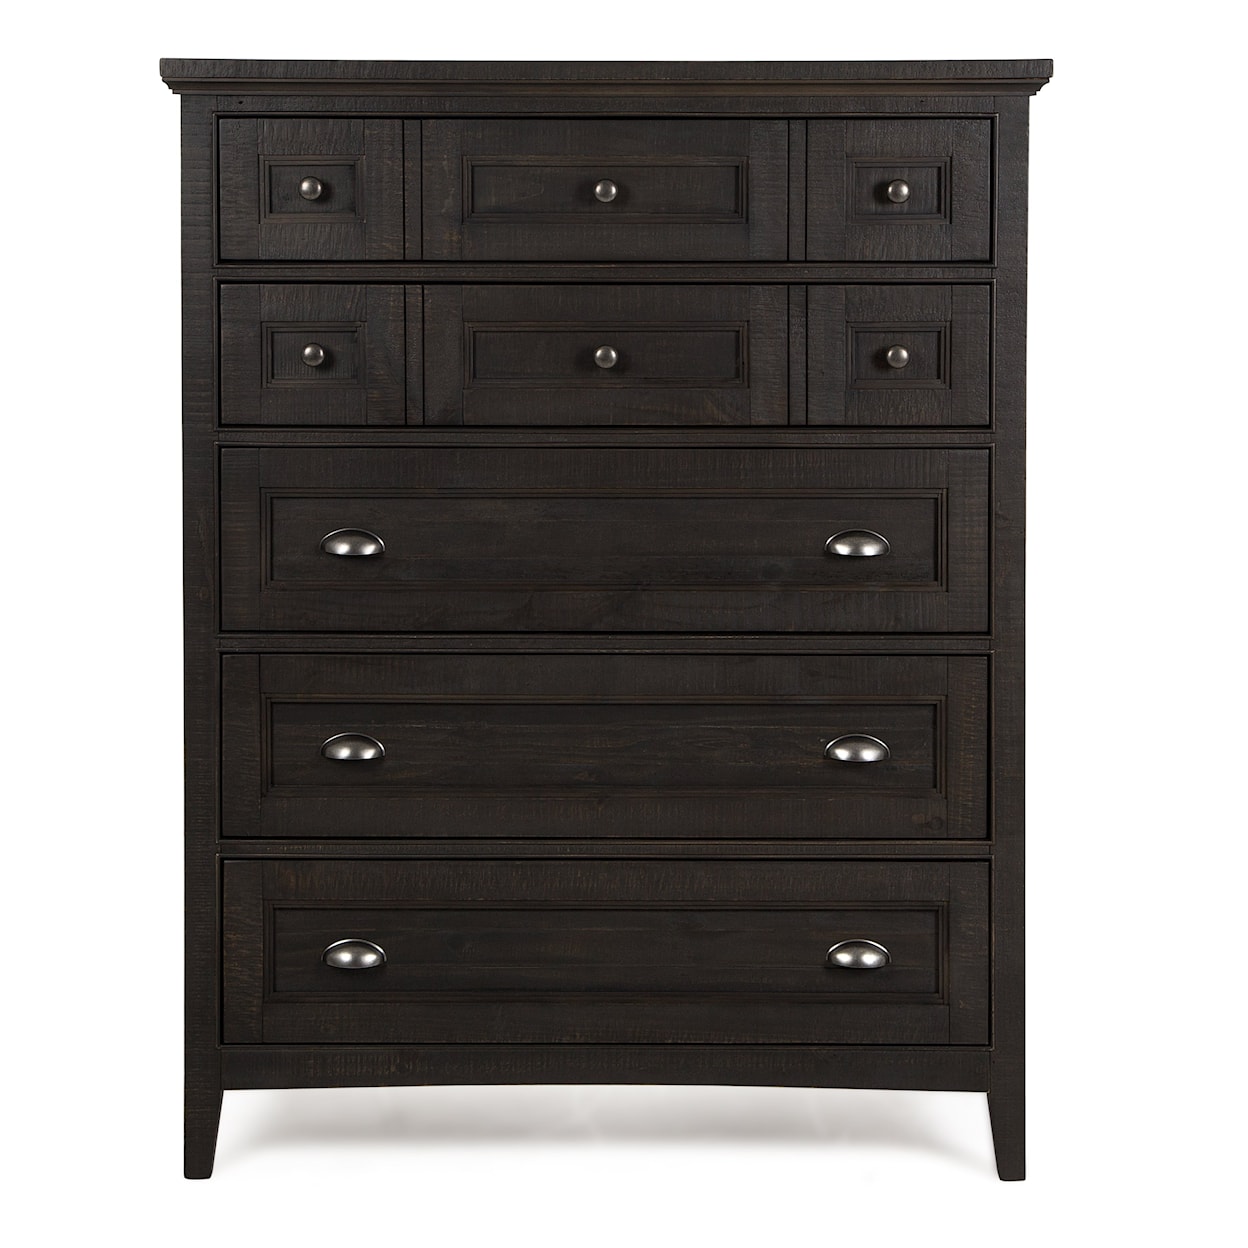 Belfort Select Wells 5-Drawer Chest